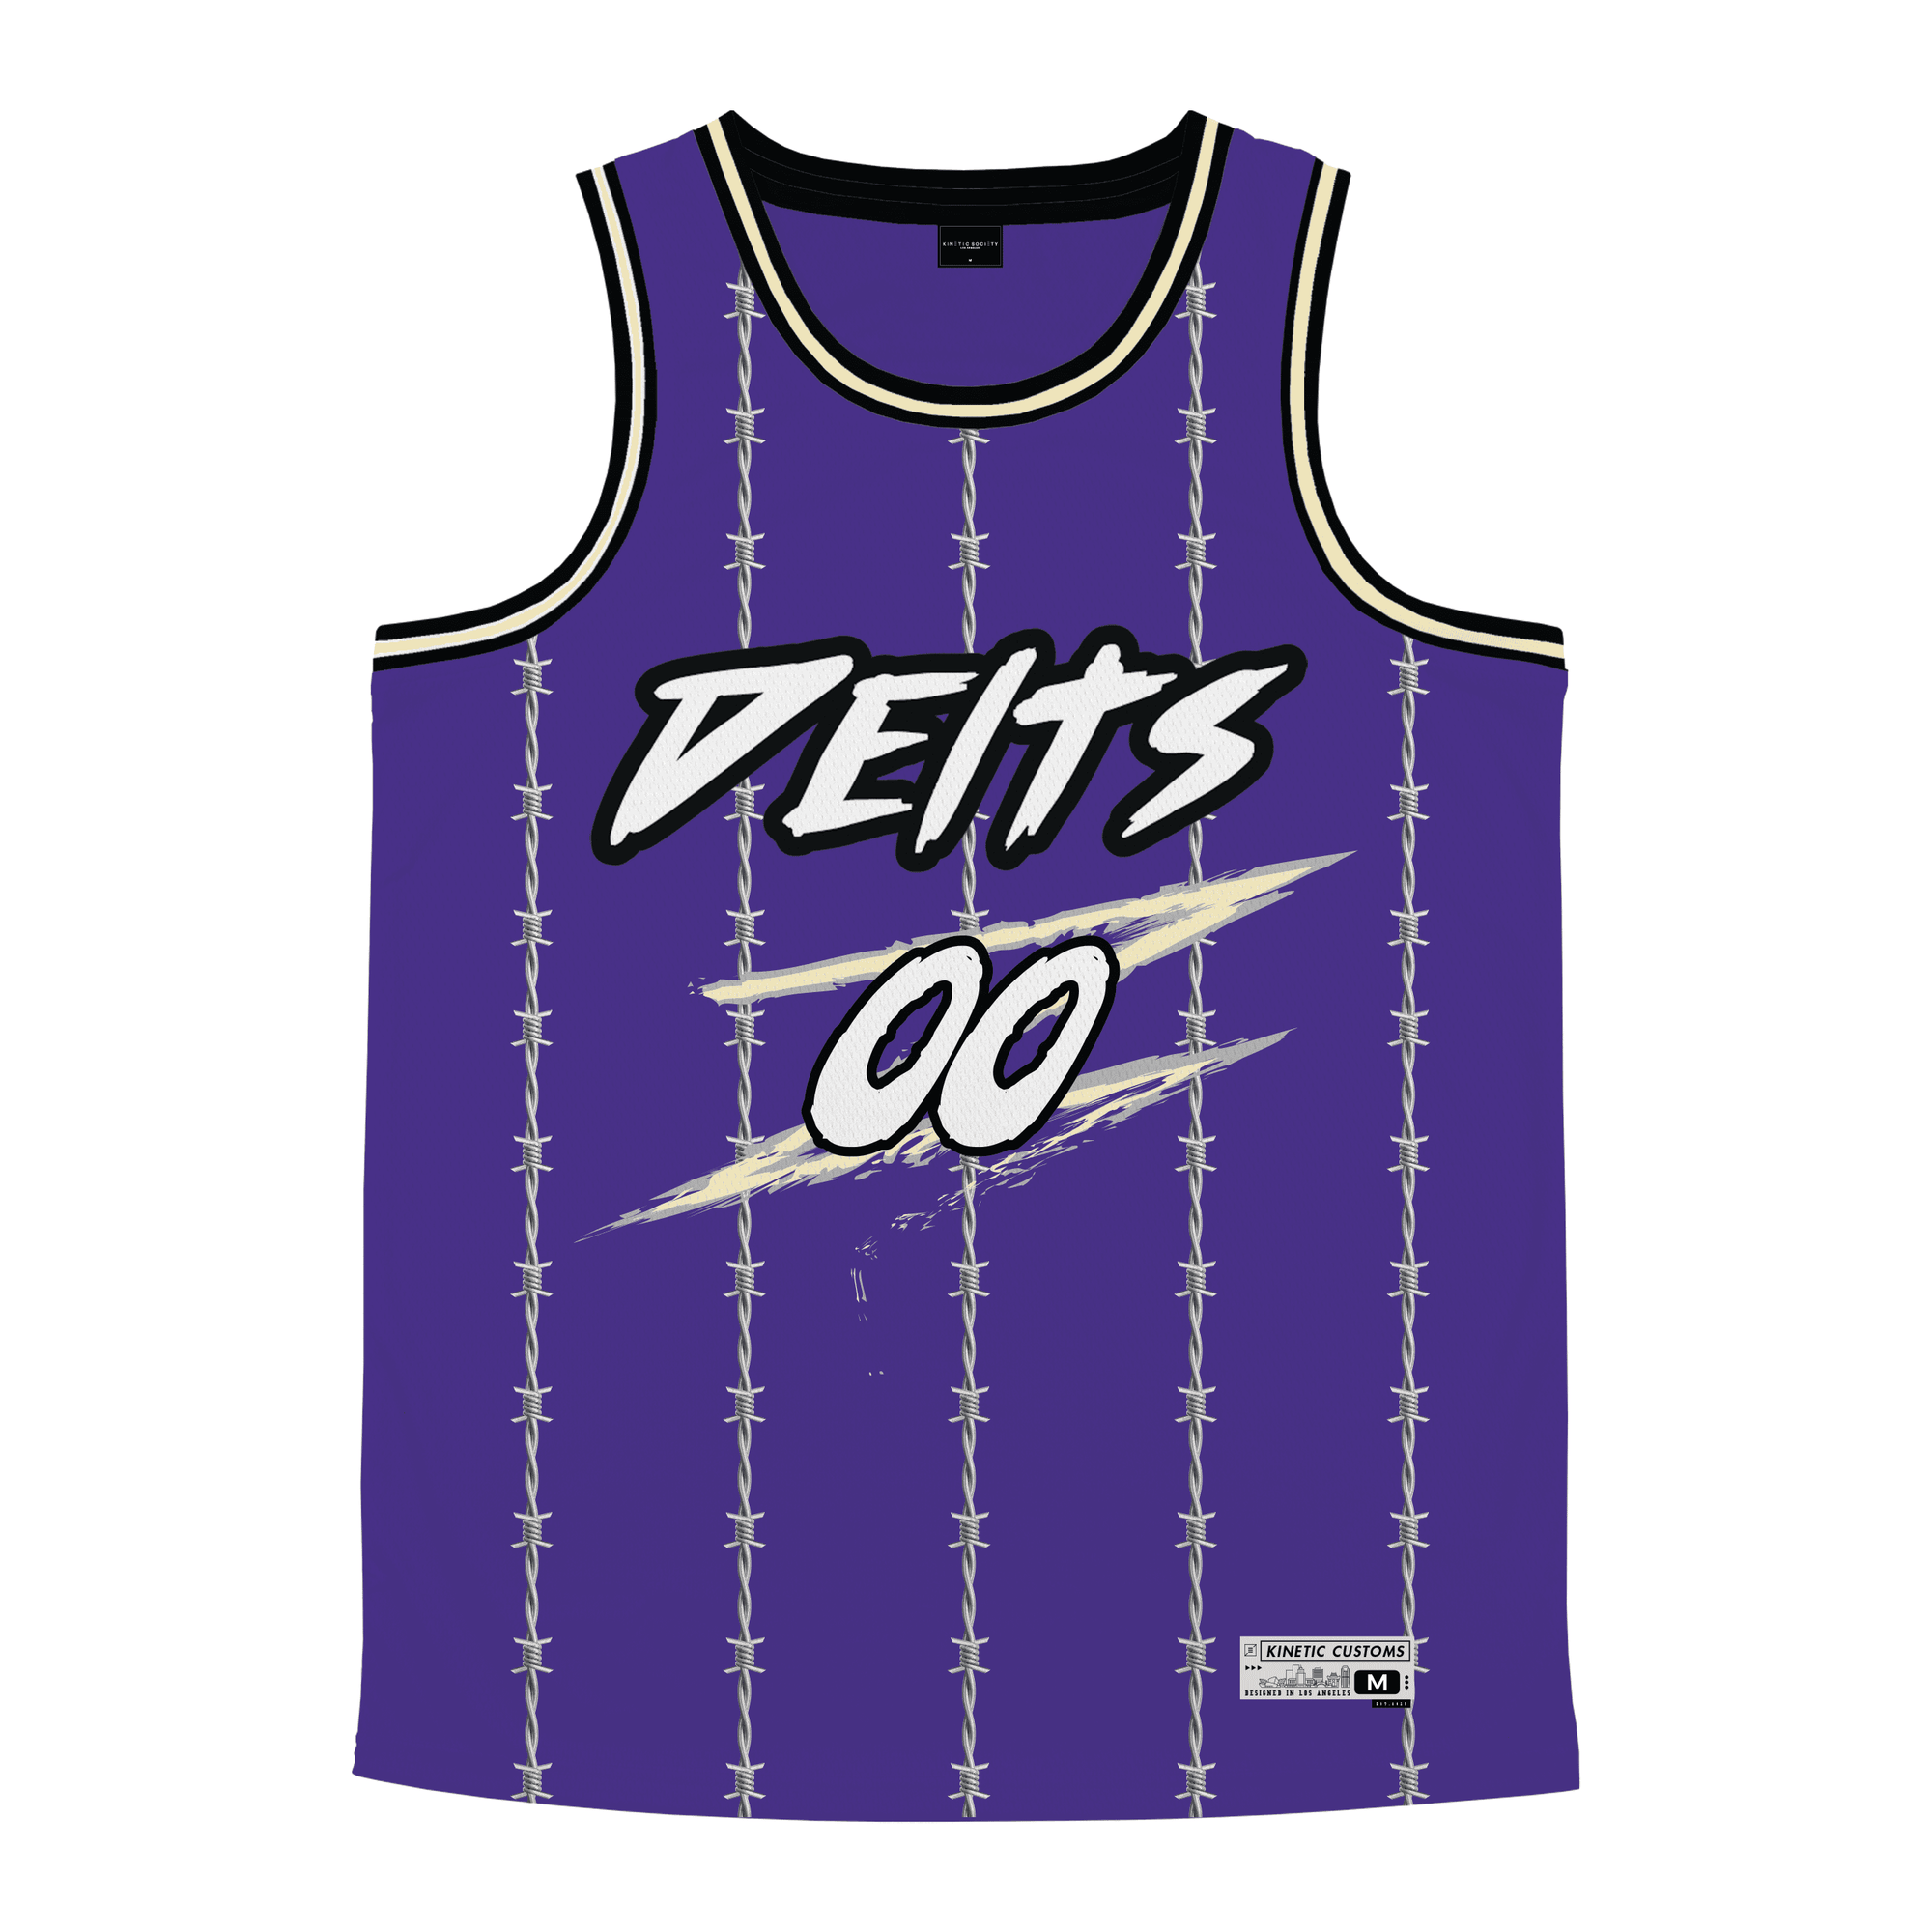 Delta Tau Delta - Barbed Wire Basketball Jersey